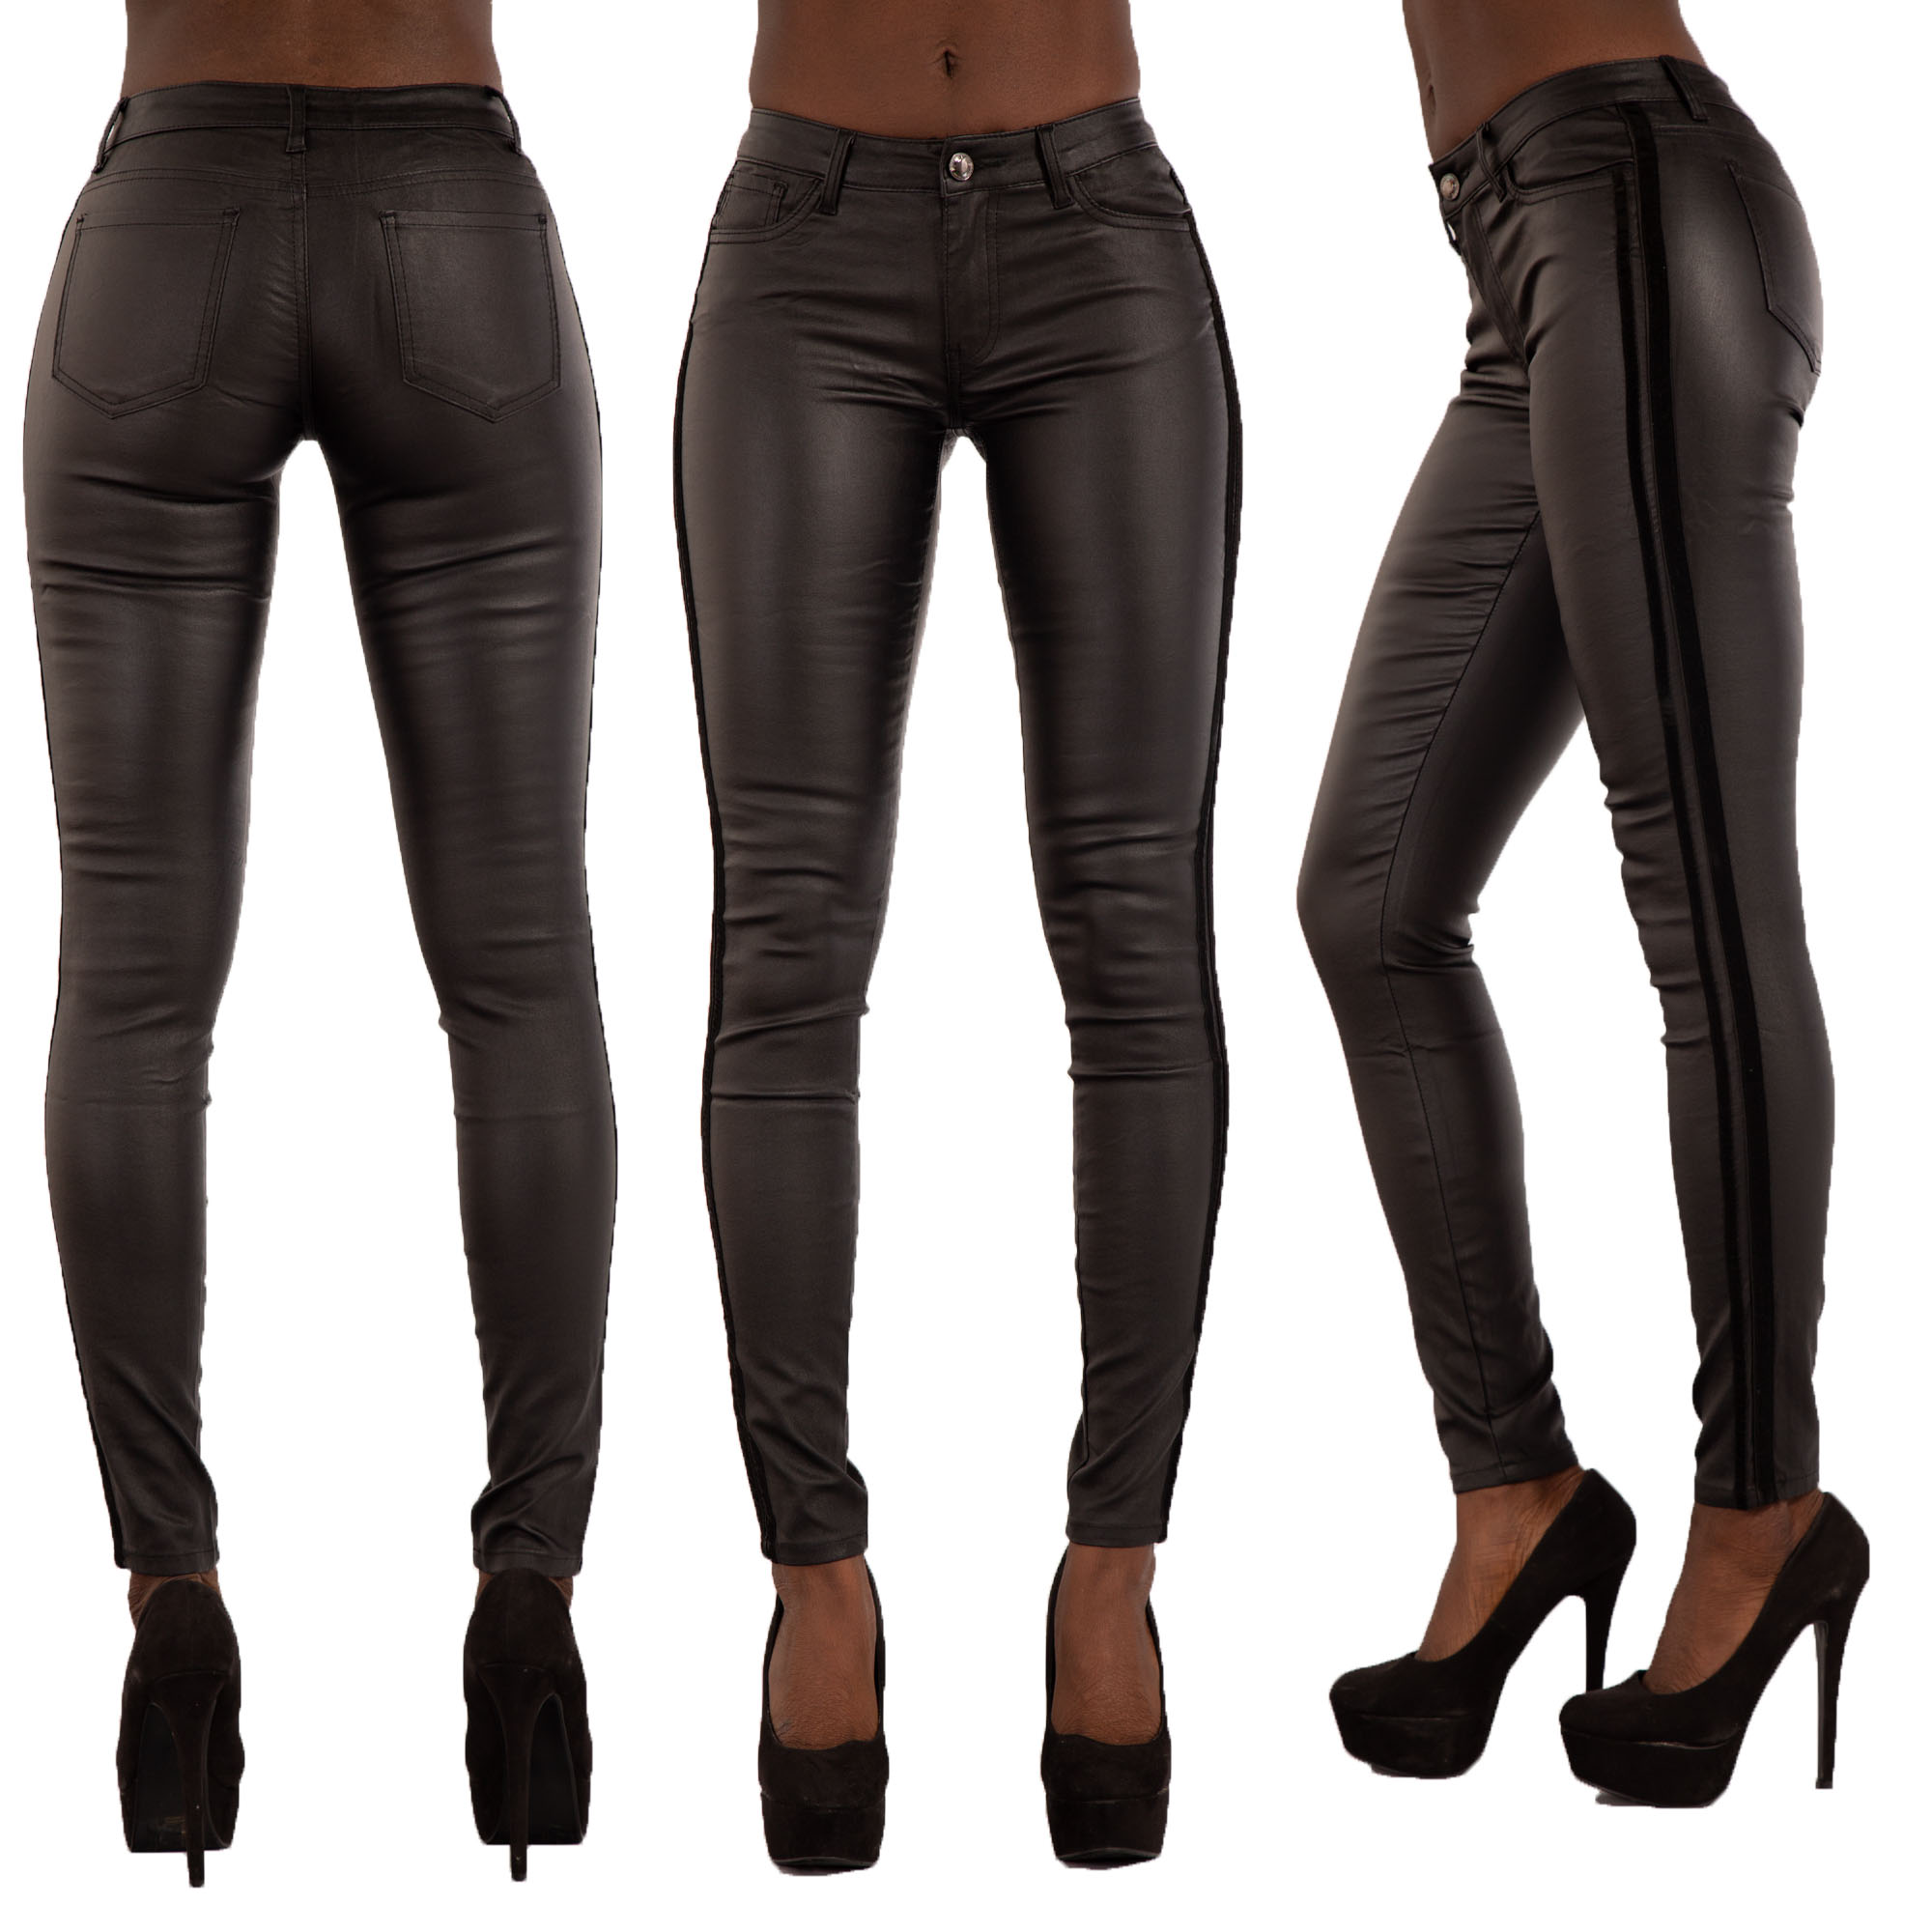 black high waisted wet look jeans